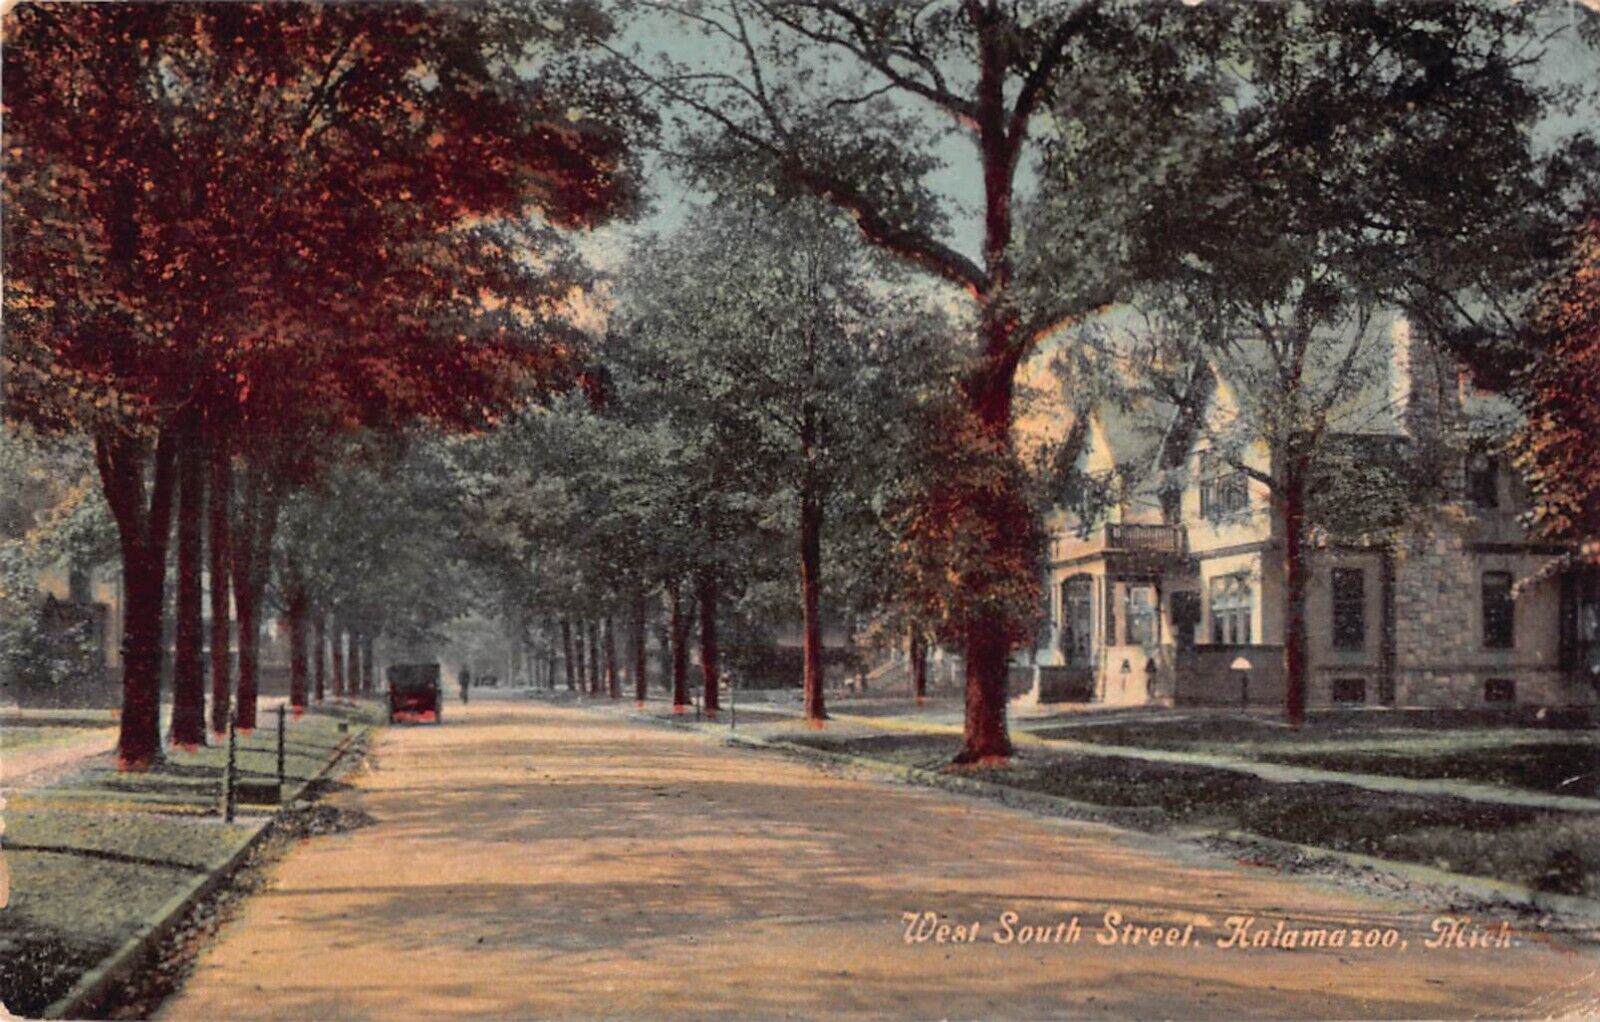 1911 Postcard of Lovely Residences on West South Street, Kalamzoo, Michigan